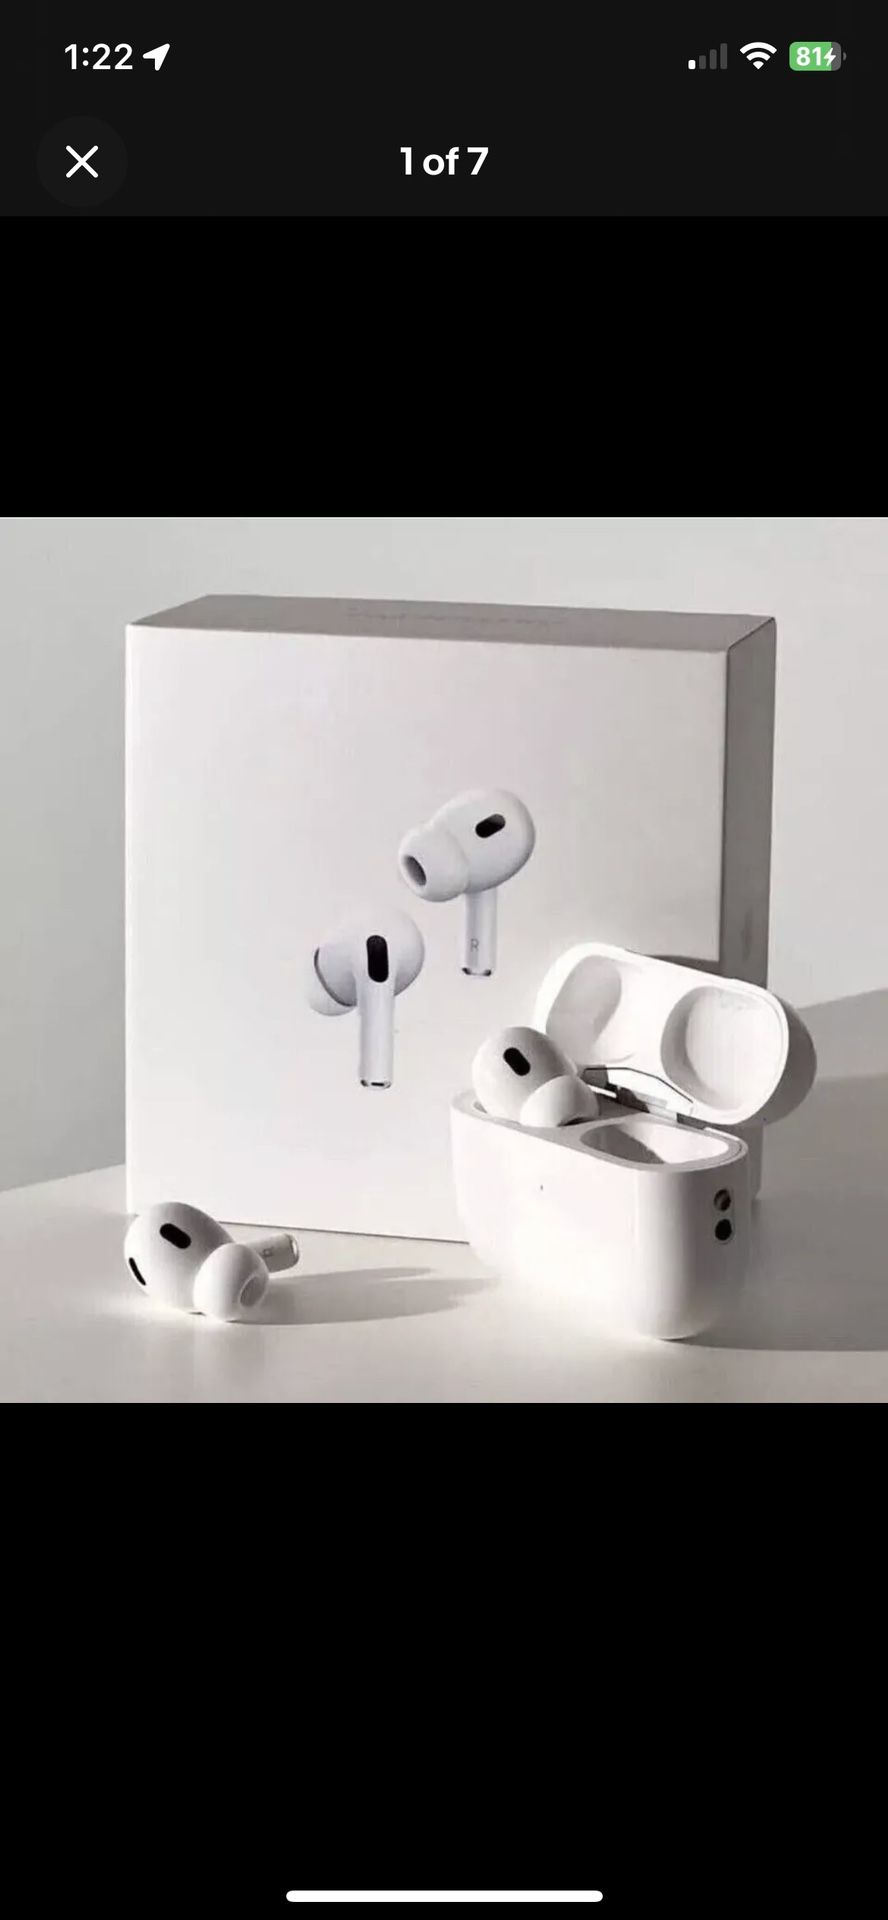 AirPods Pro’s 2 W/ Noise Cancellation